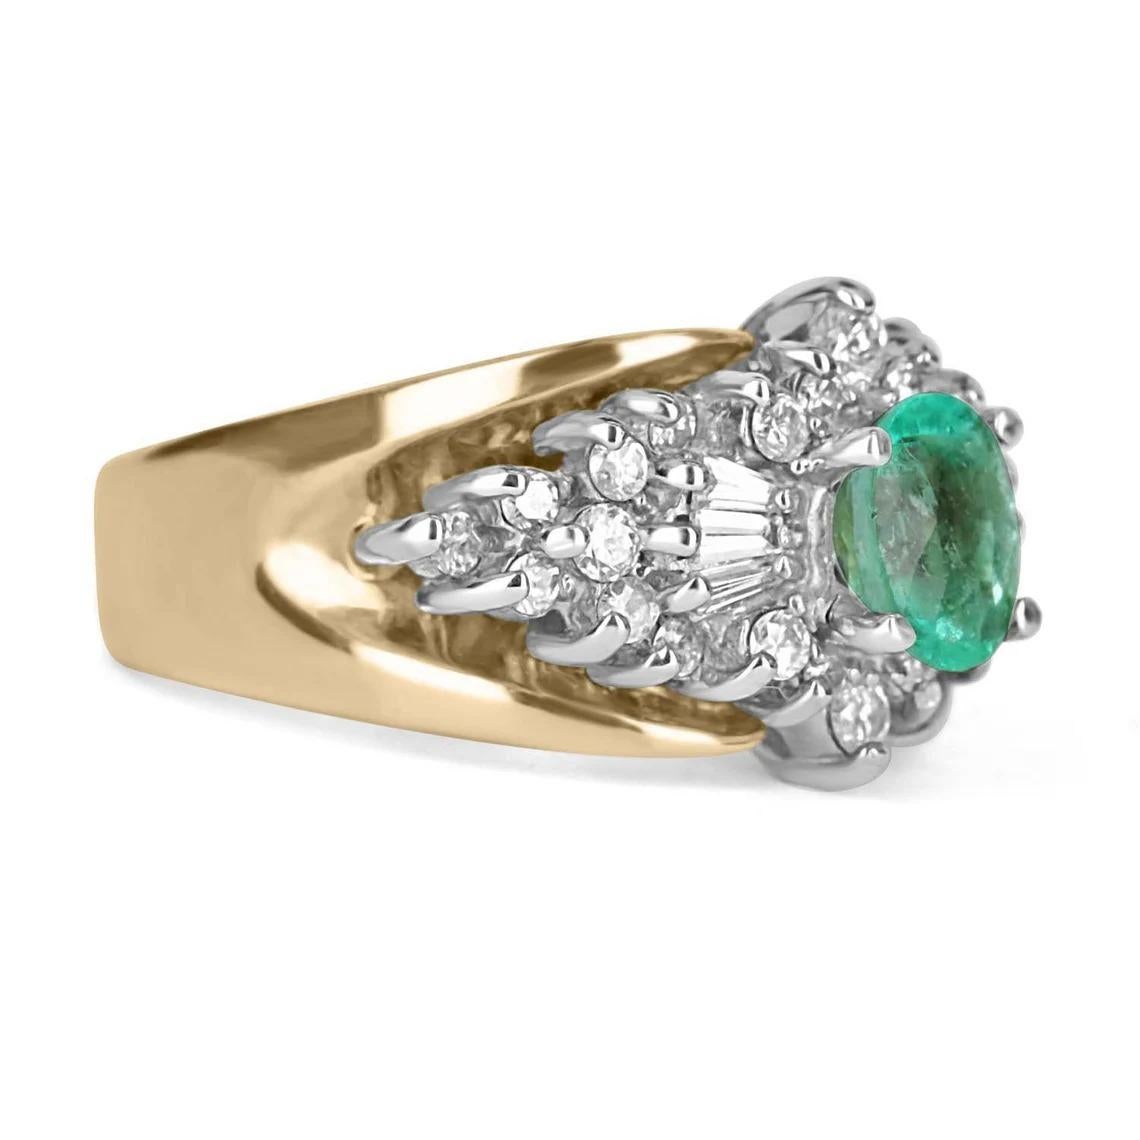 Circa 1980 Elegantly styled with graceful curves, this handmade cocktail ring from our collection is a fabulous verdant treasure. At the center, a .82 carat oval Colombian emerald catches the eye with its electric-rich green hue, beautifully